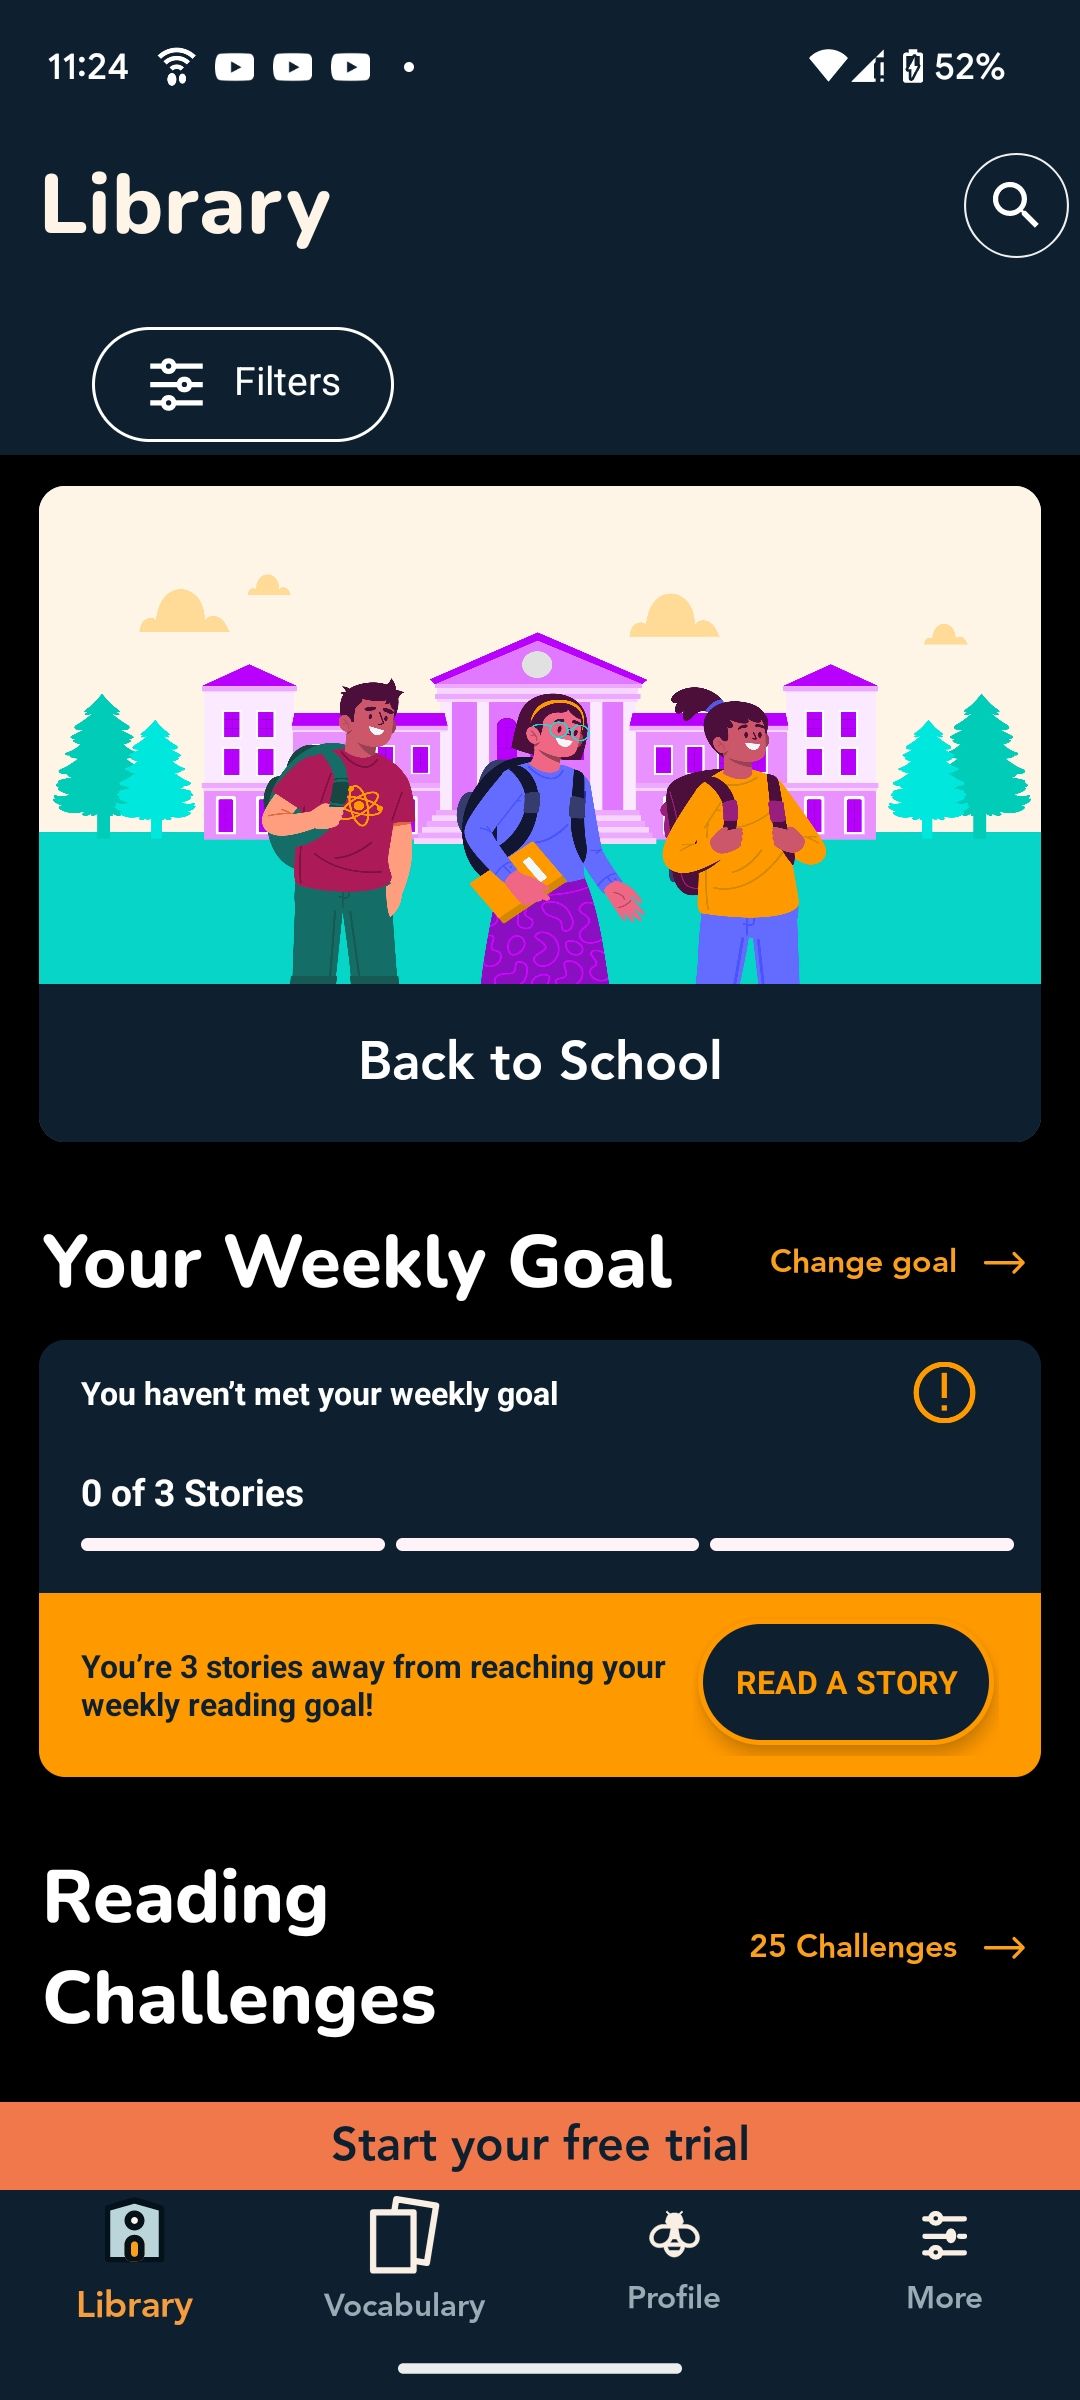 Beelinguapp home screen showing weekly goal and reading challenges